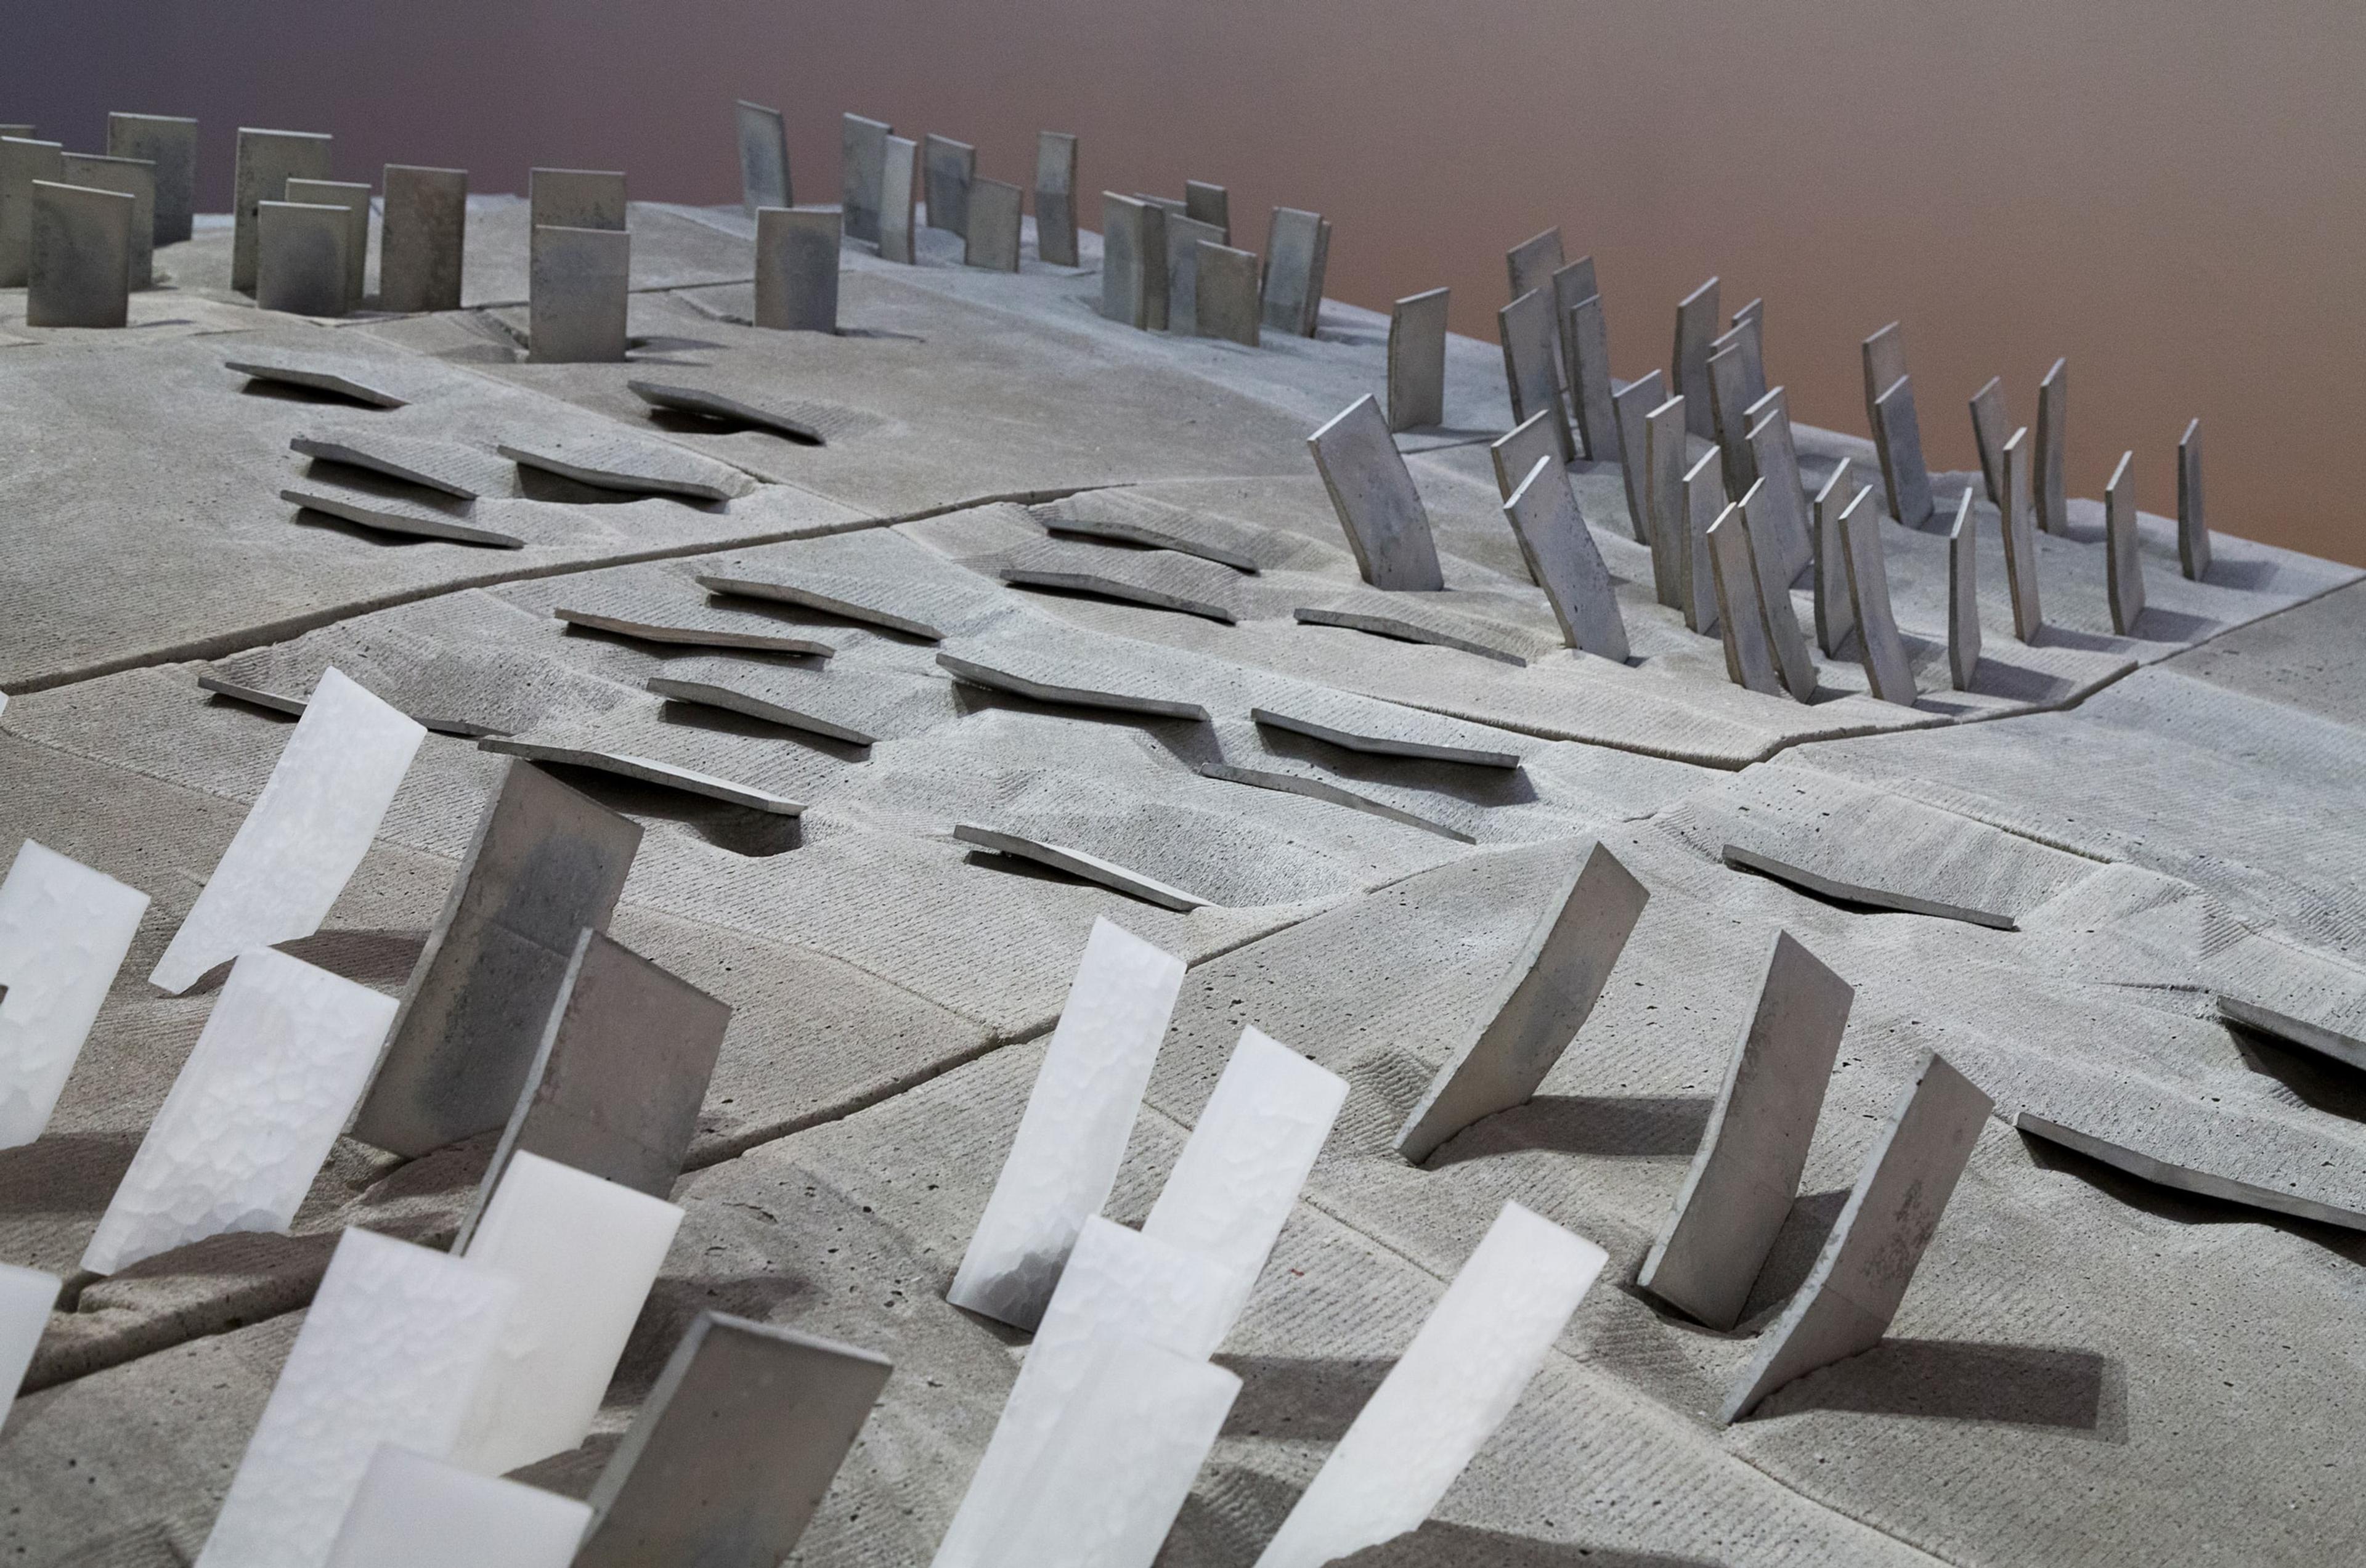 Simon Twose, detail view of Concrete Drawing, 2014-5, concrete, polystyrene, wax, photographs and graphite, in the exhibition Drawing Is/Not Building at the Adam Art Gallery Te Pātaka Toi, Victoria University of Wellington (photo: Shaun Waugh)